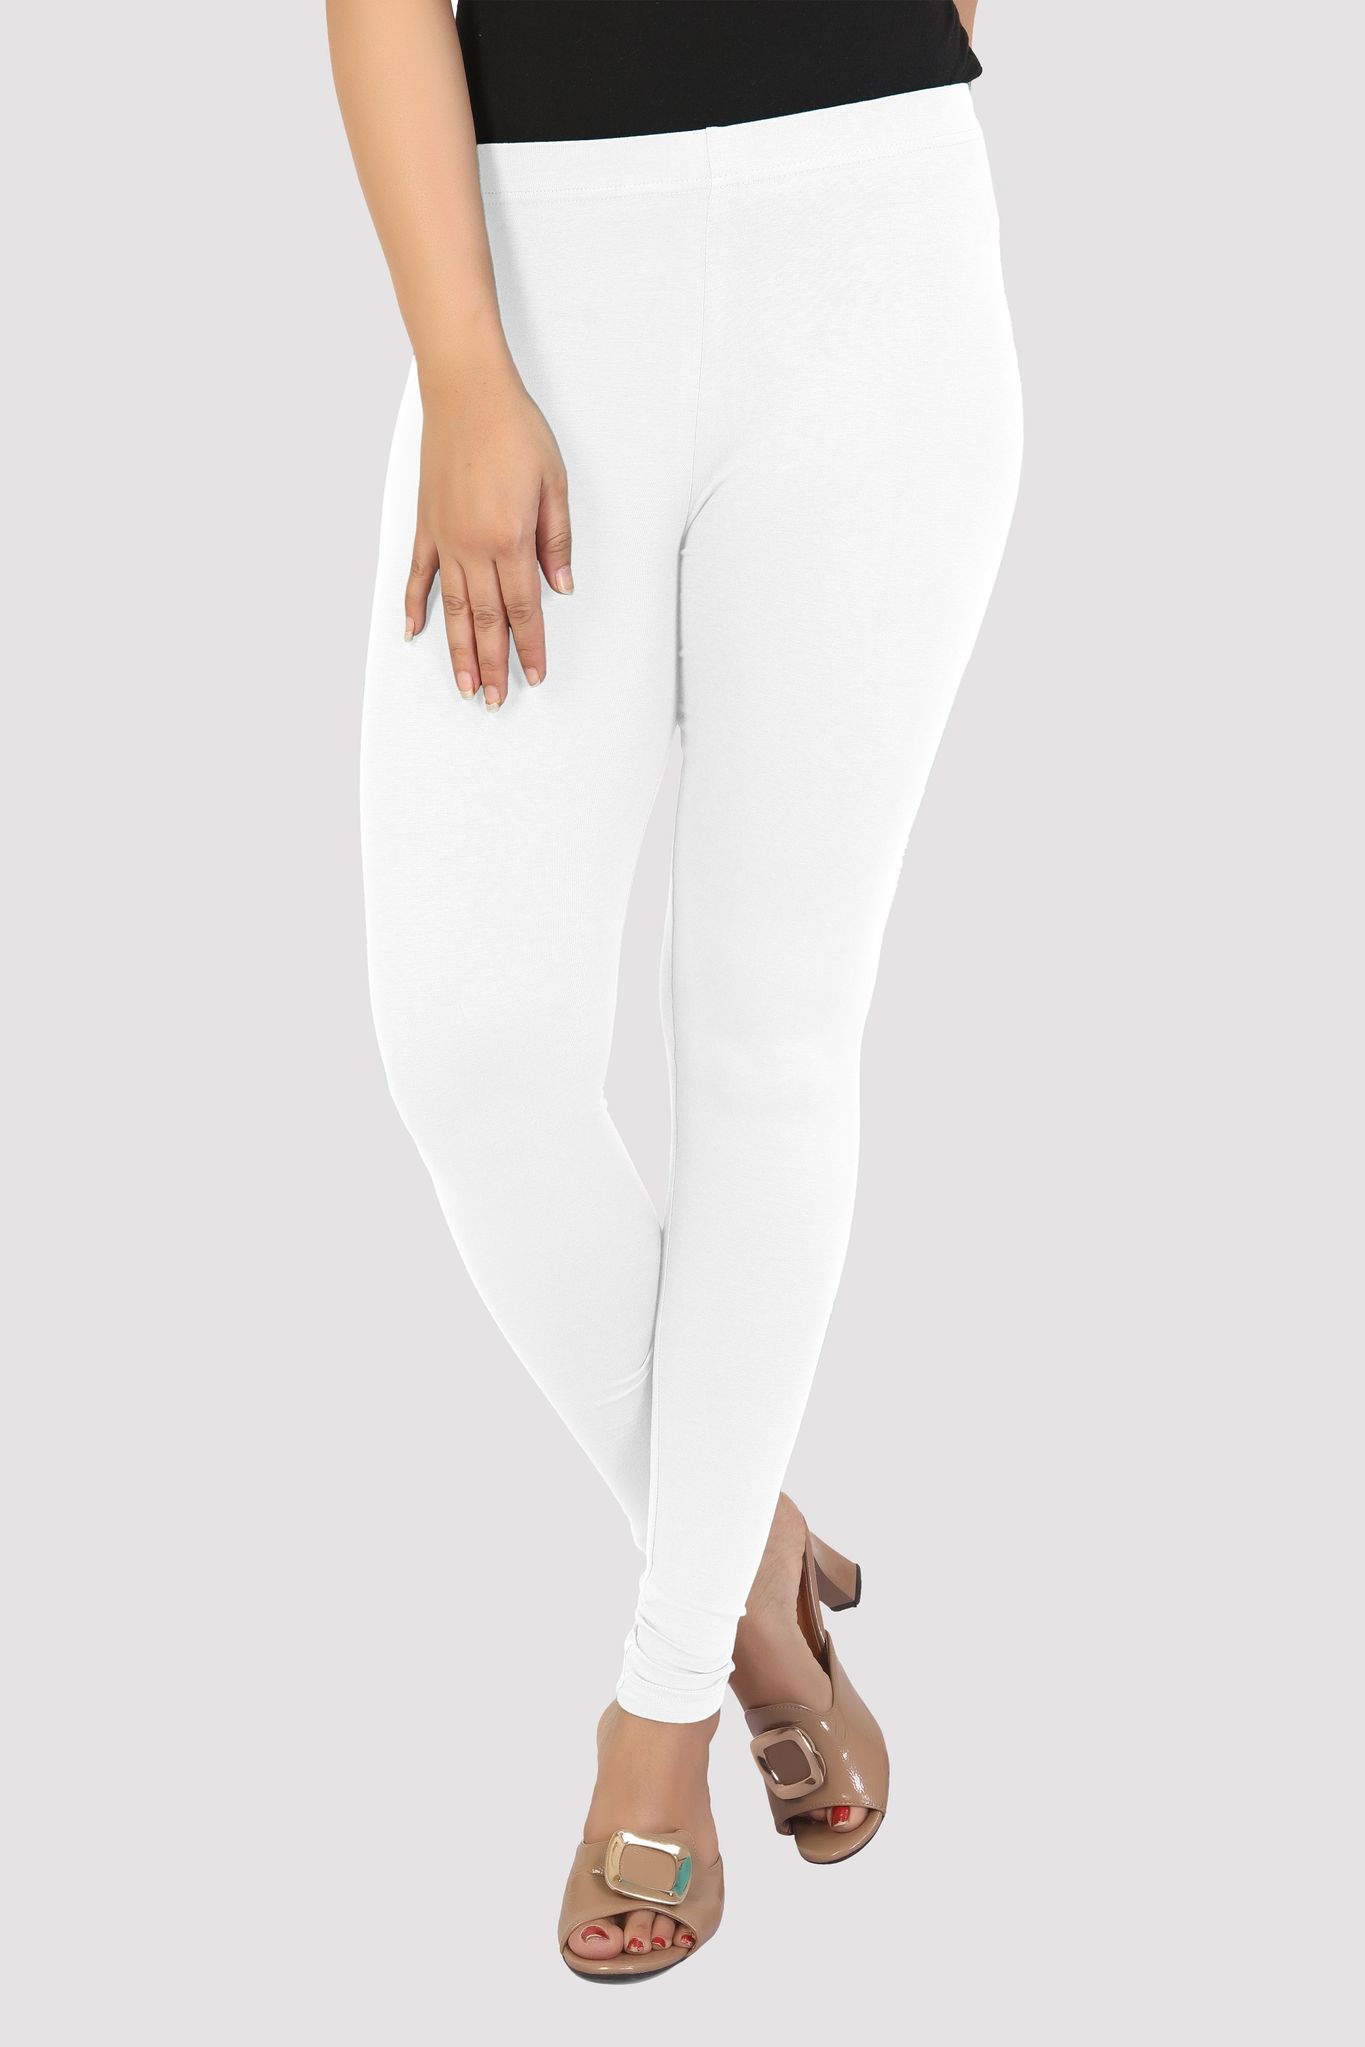 Only She Woman's & Girl's Cotton Ankle Length Leggings – Online Shopping  site in India